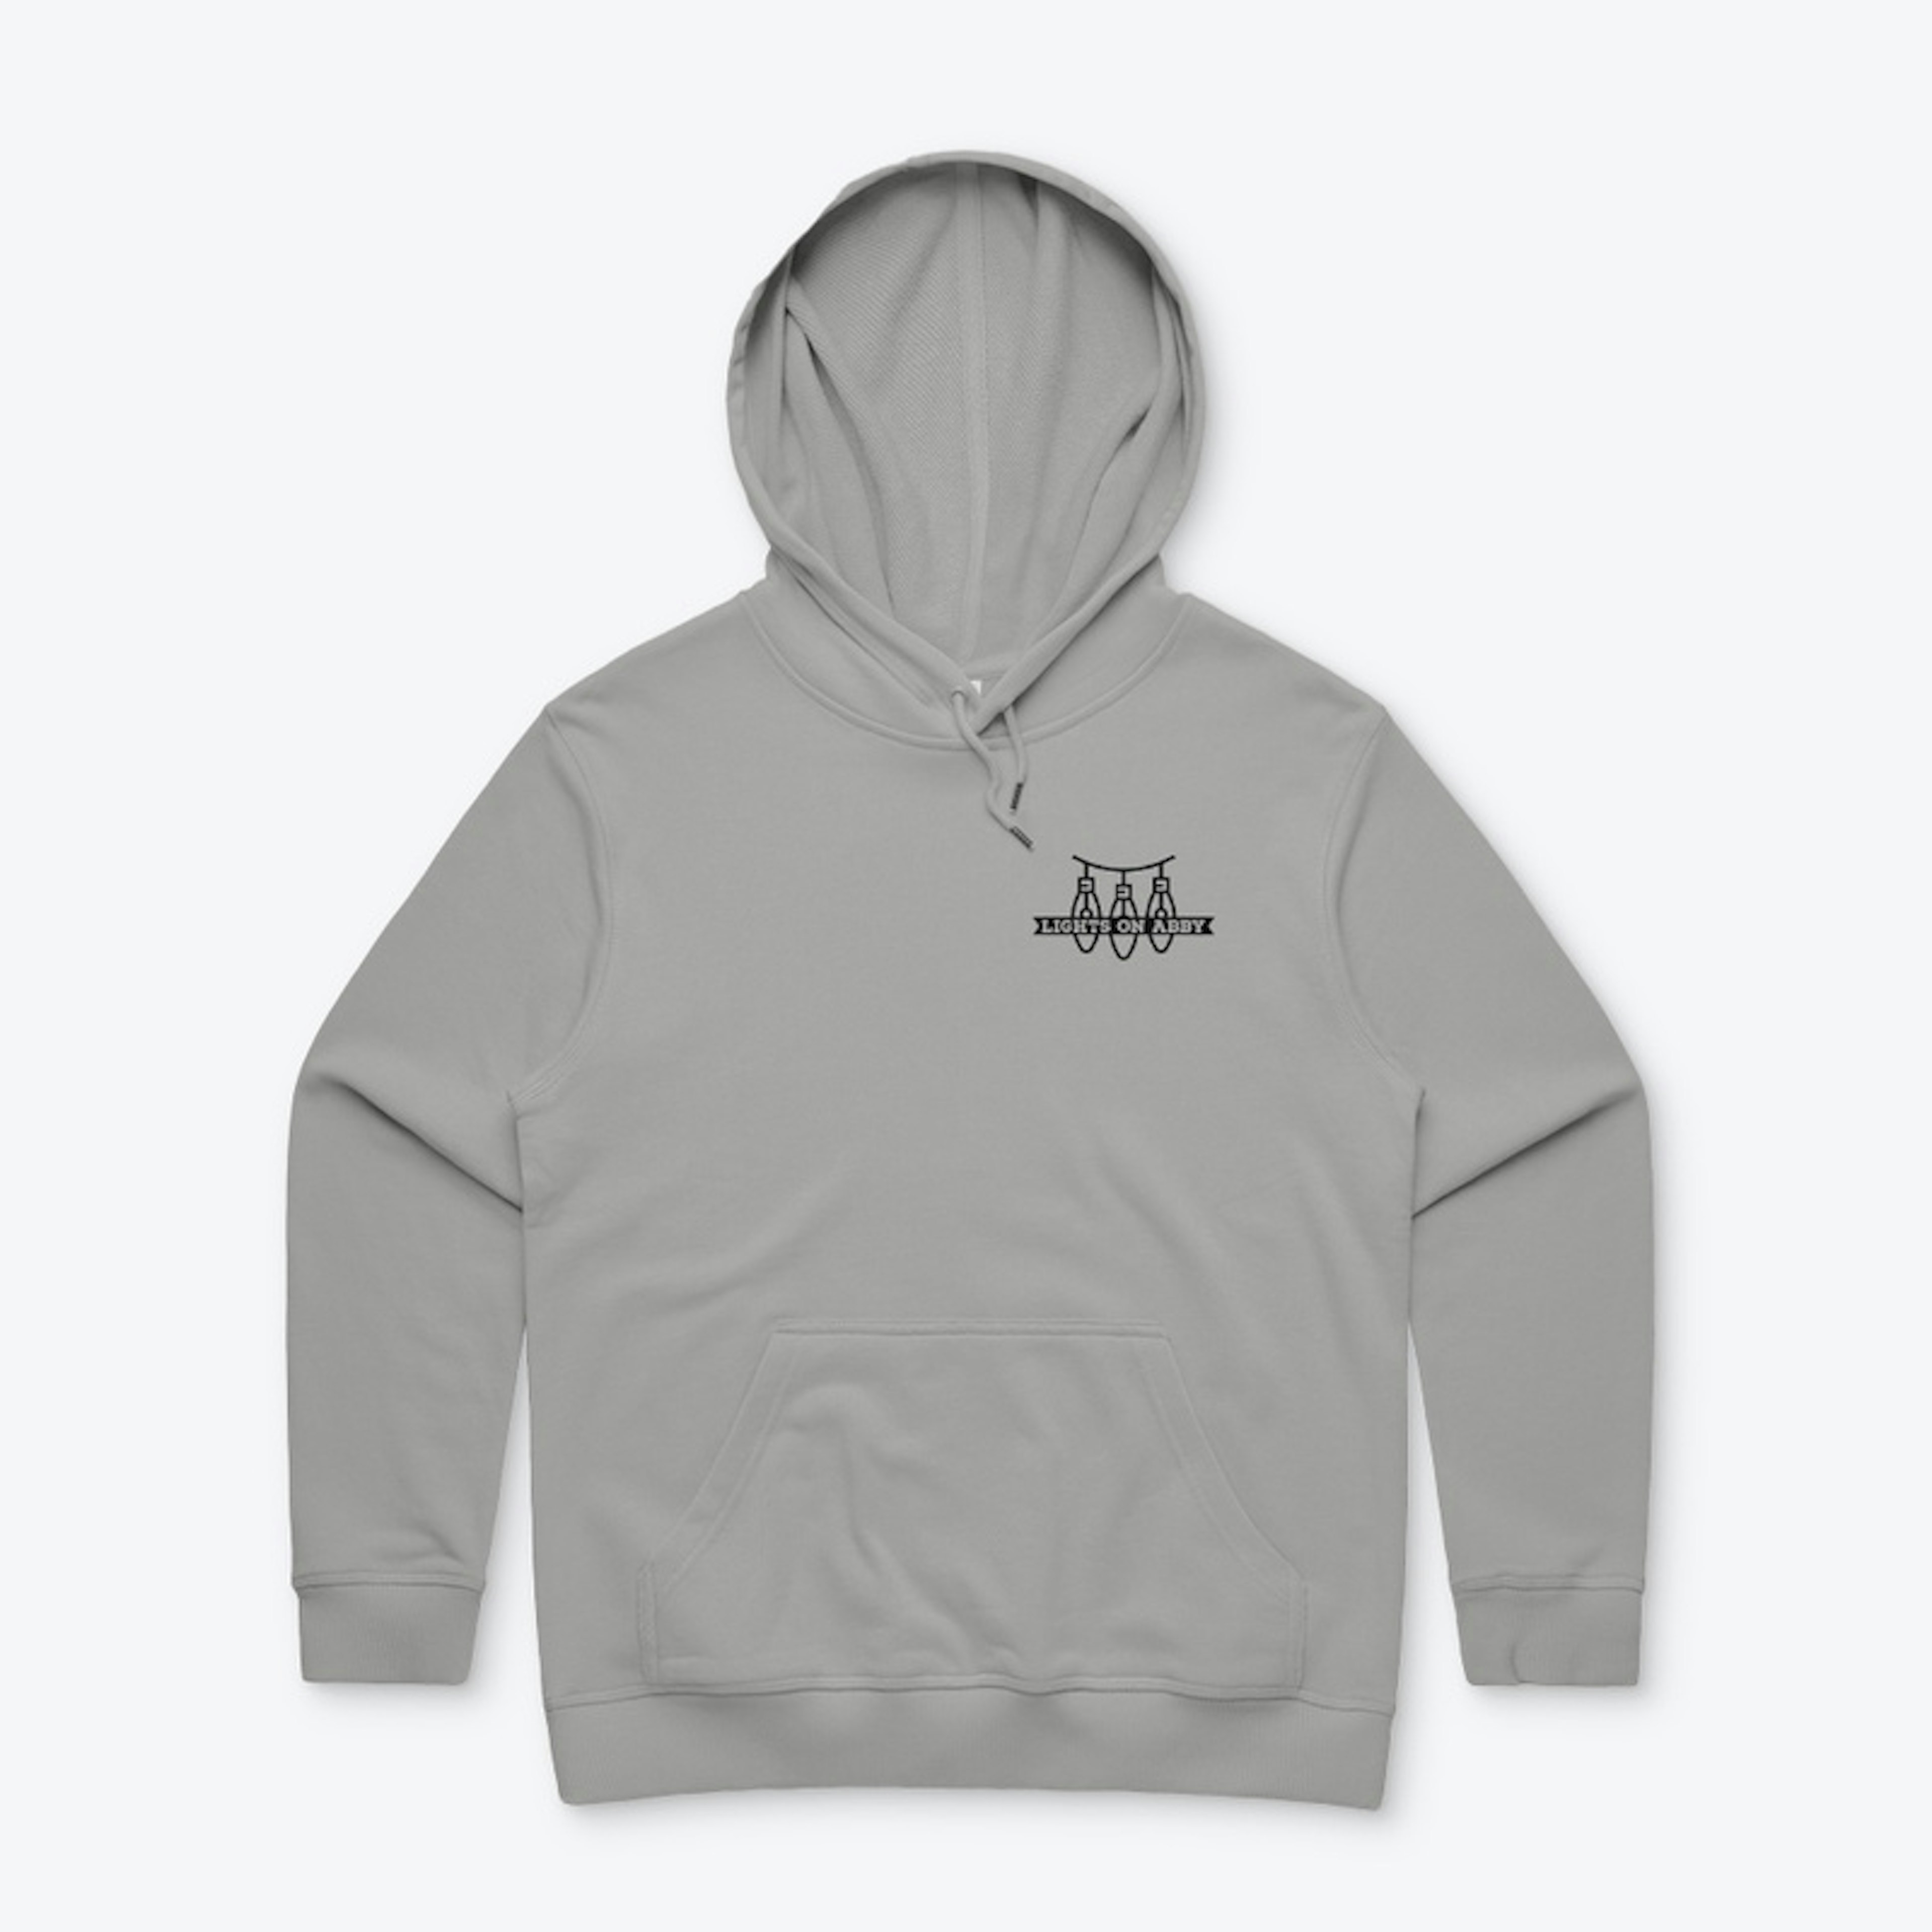 Lights on Abby Prem Pullover Hoodie - BL